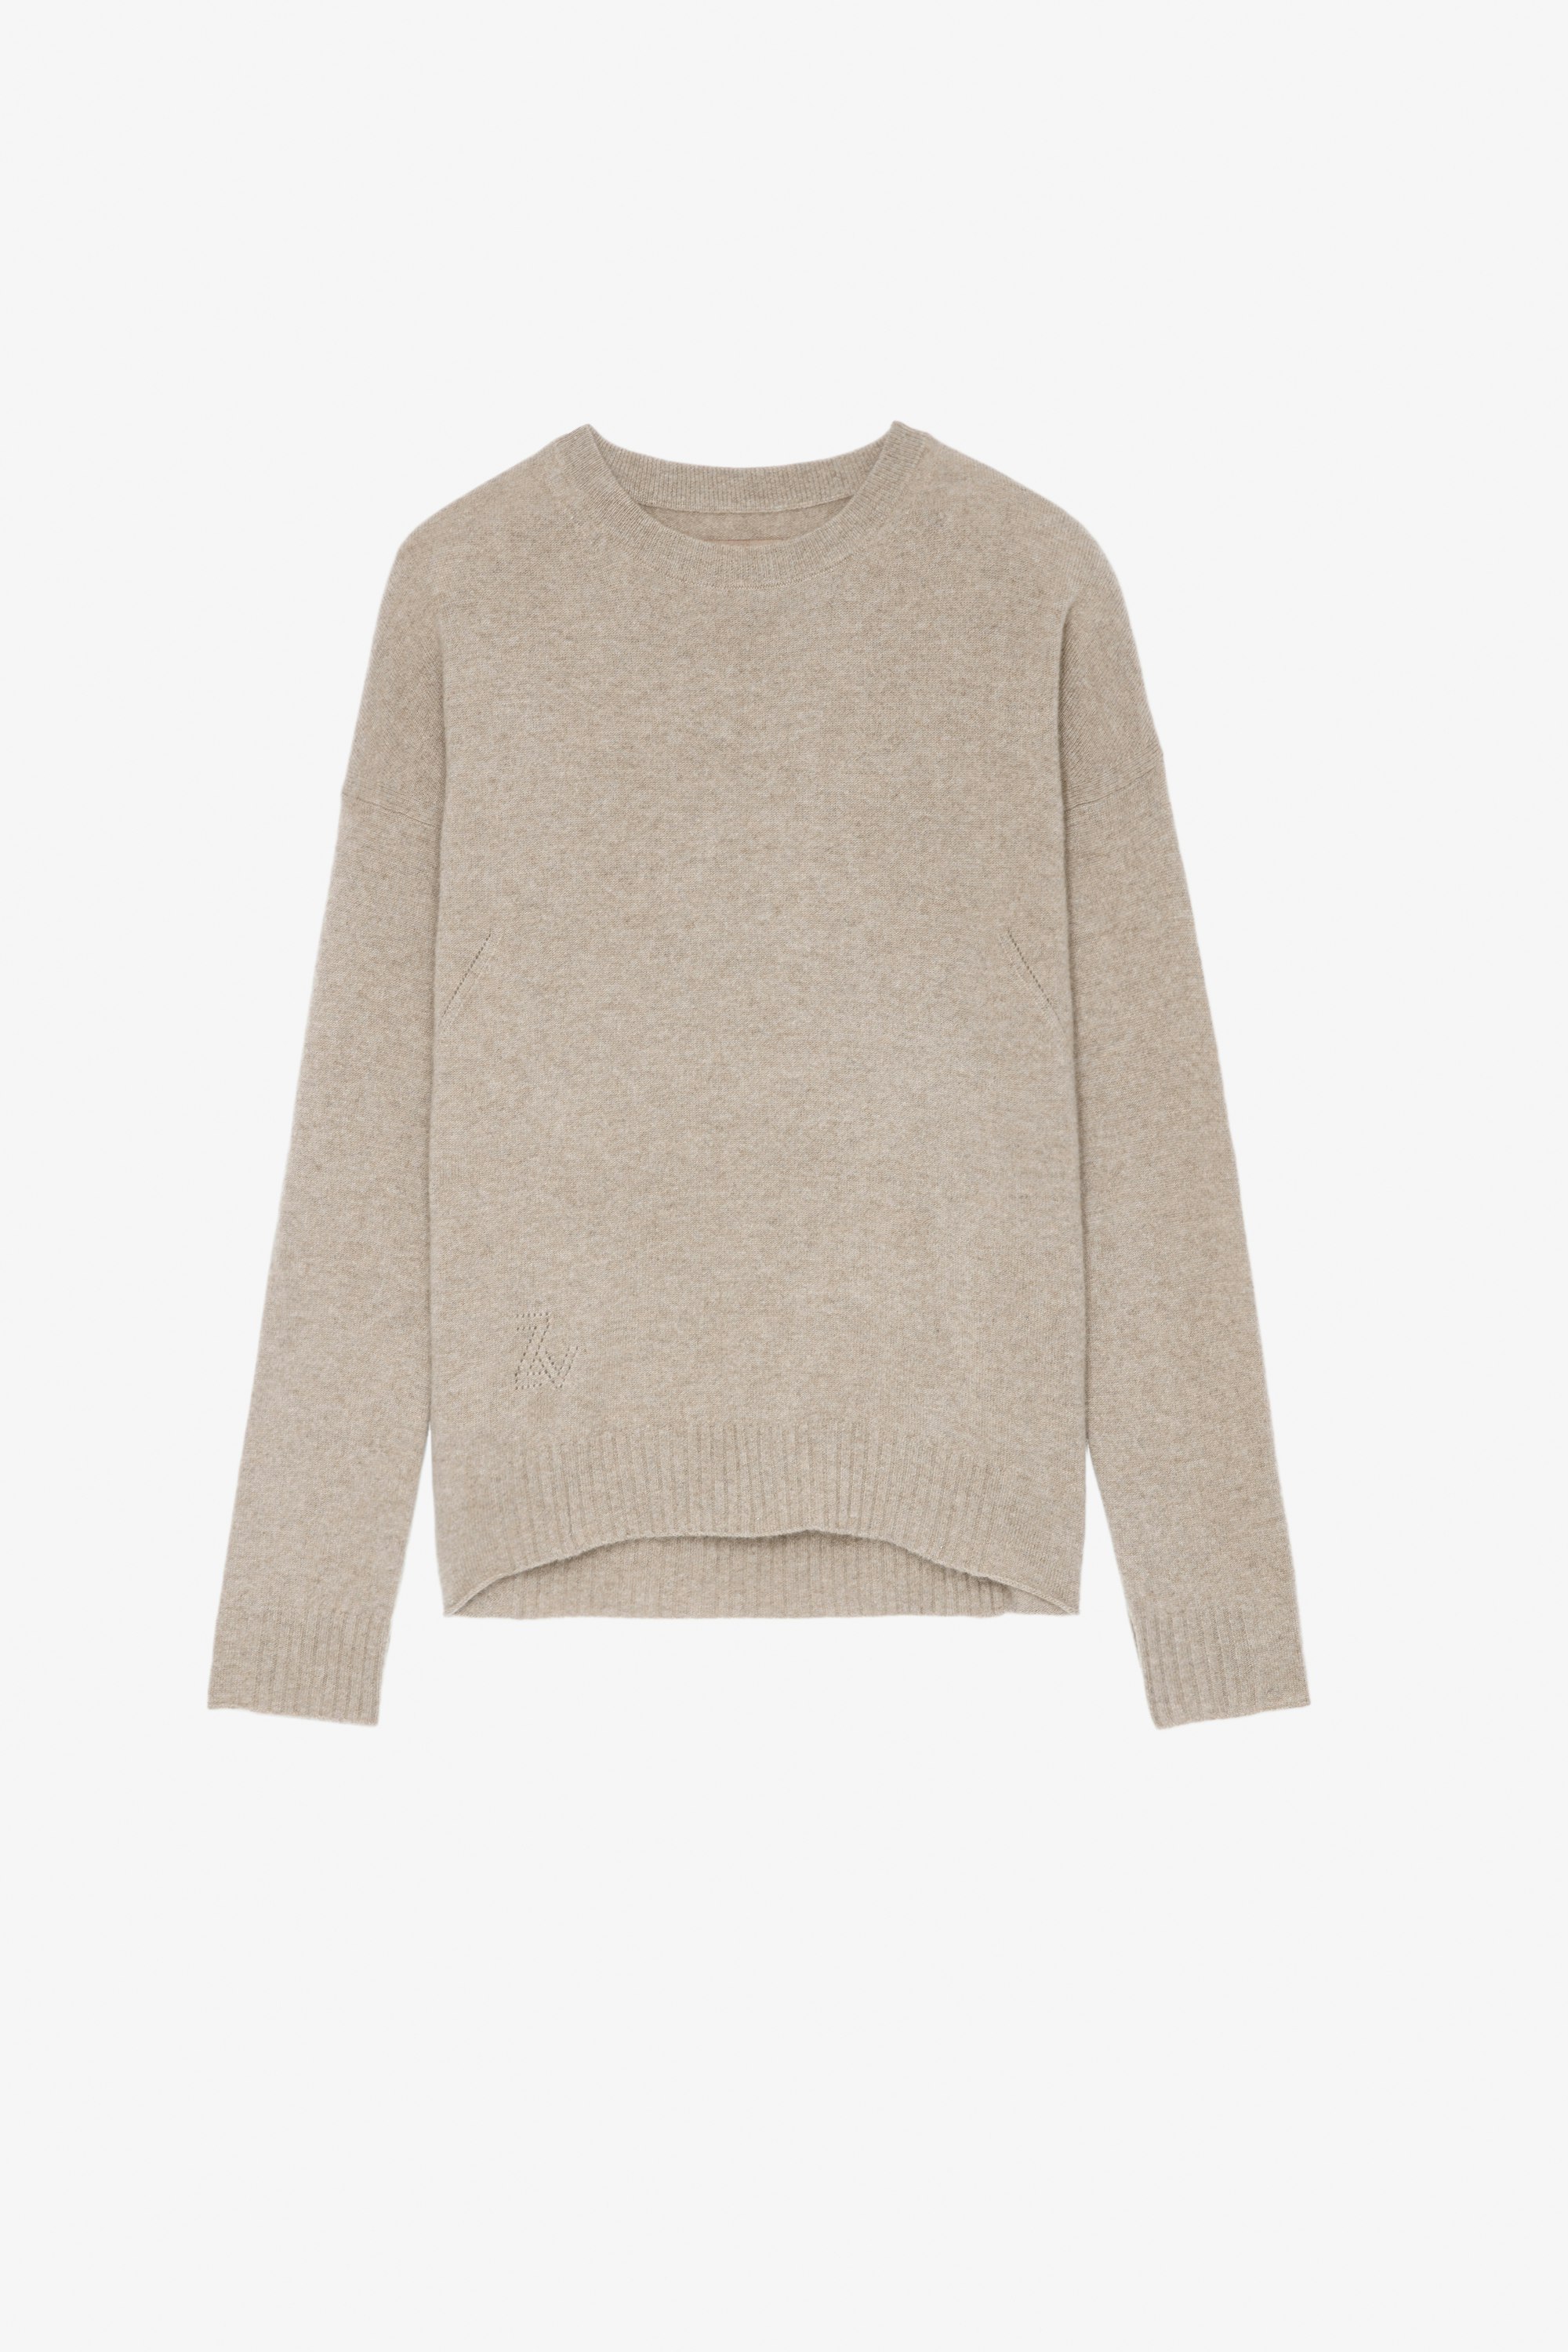 Cici Patch カシミヤニット Women's beige cashmere sweater with star patches on the elbows